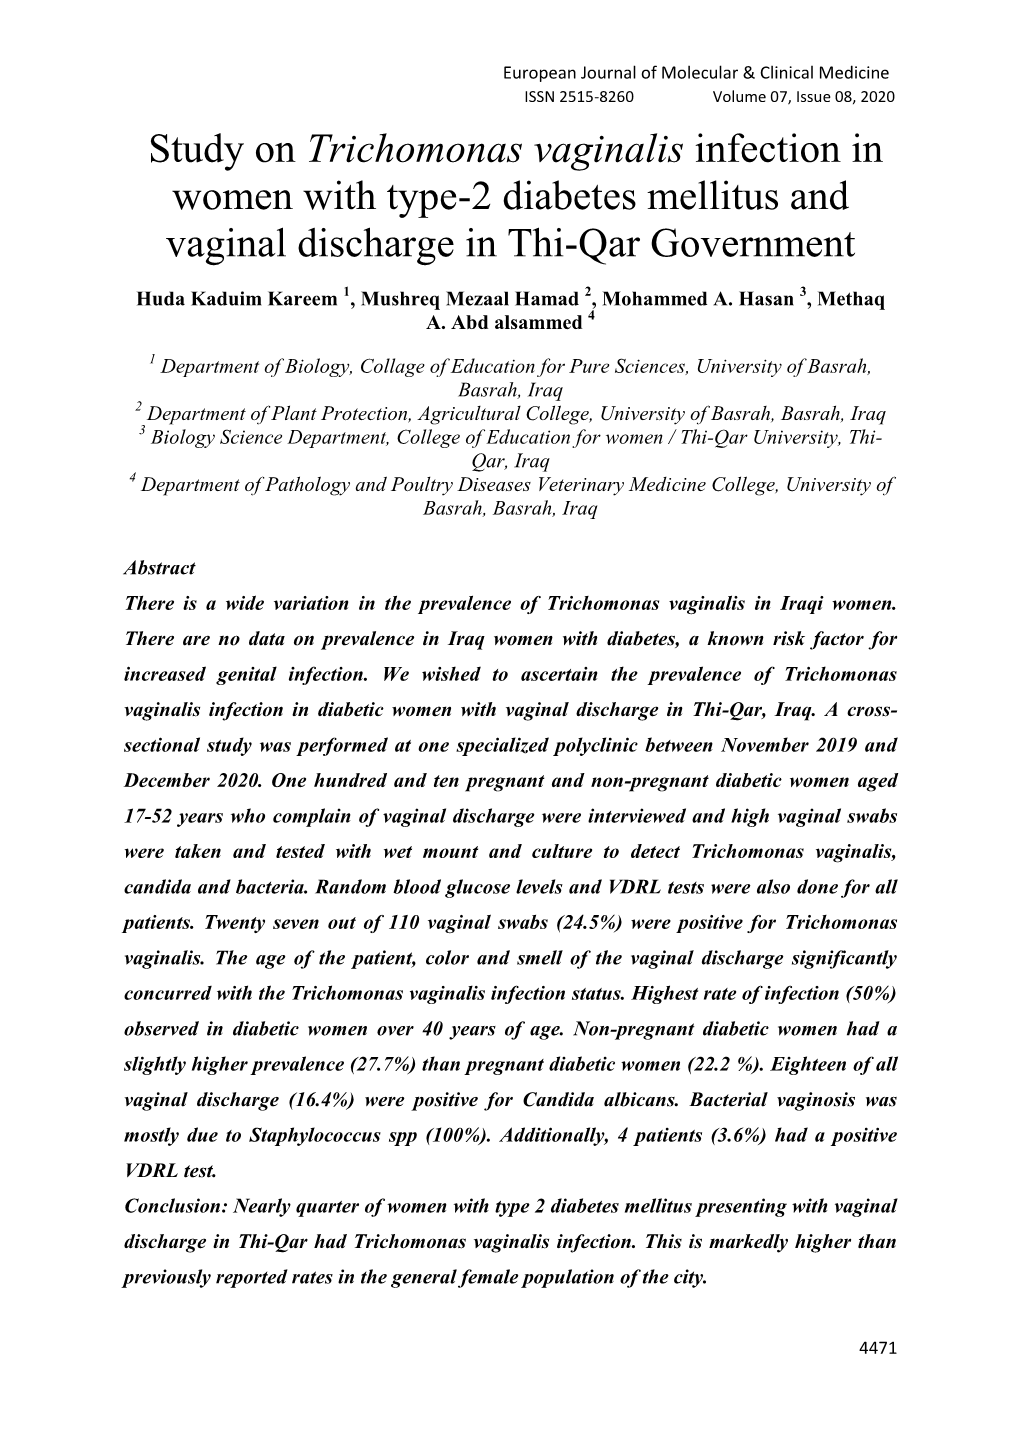 Study on Trichomonas Vaginalis Infection in Women with Type-2 Diabetes Mellitus and Vaginal Discharge in Thi-Qar Government